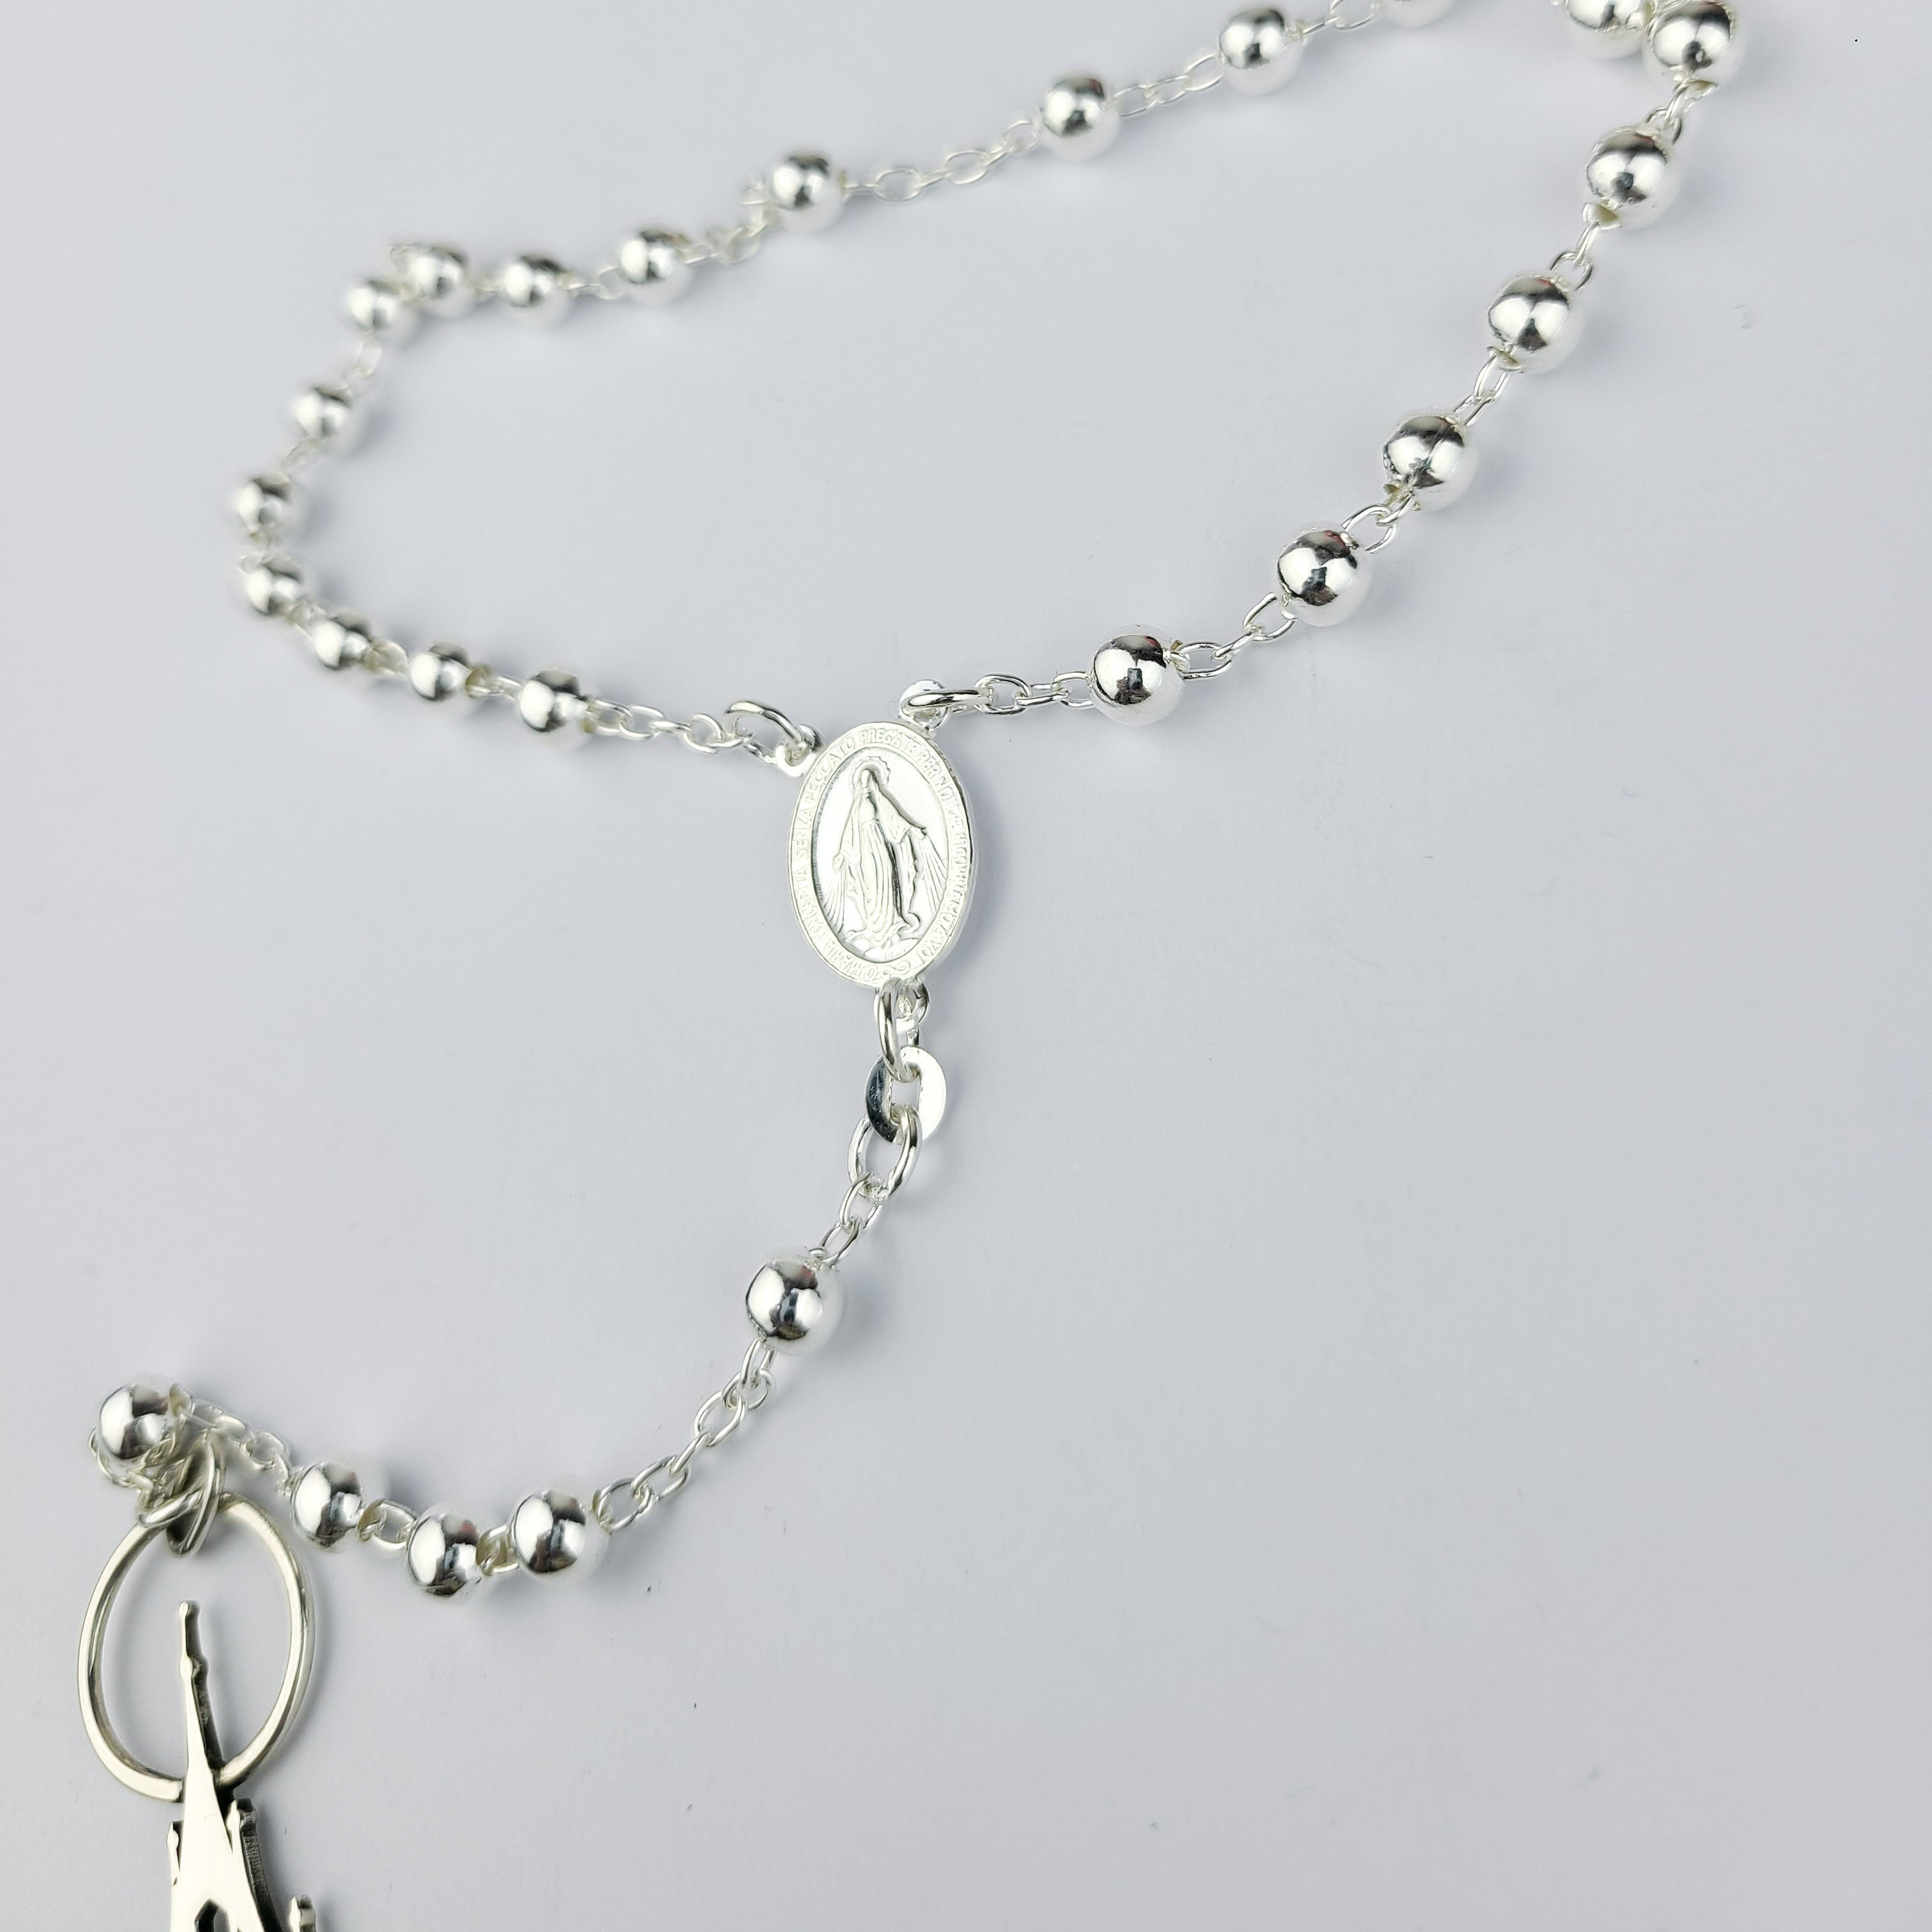 5mm Rosary Beads Necklace